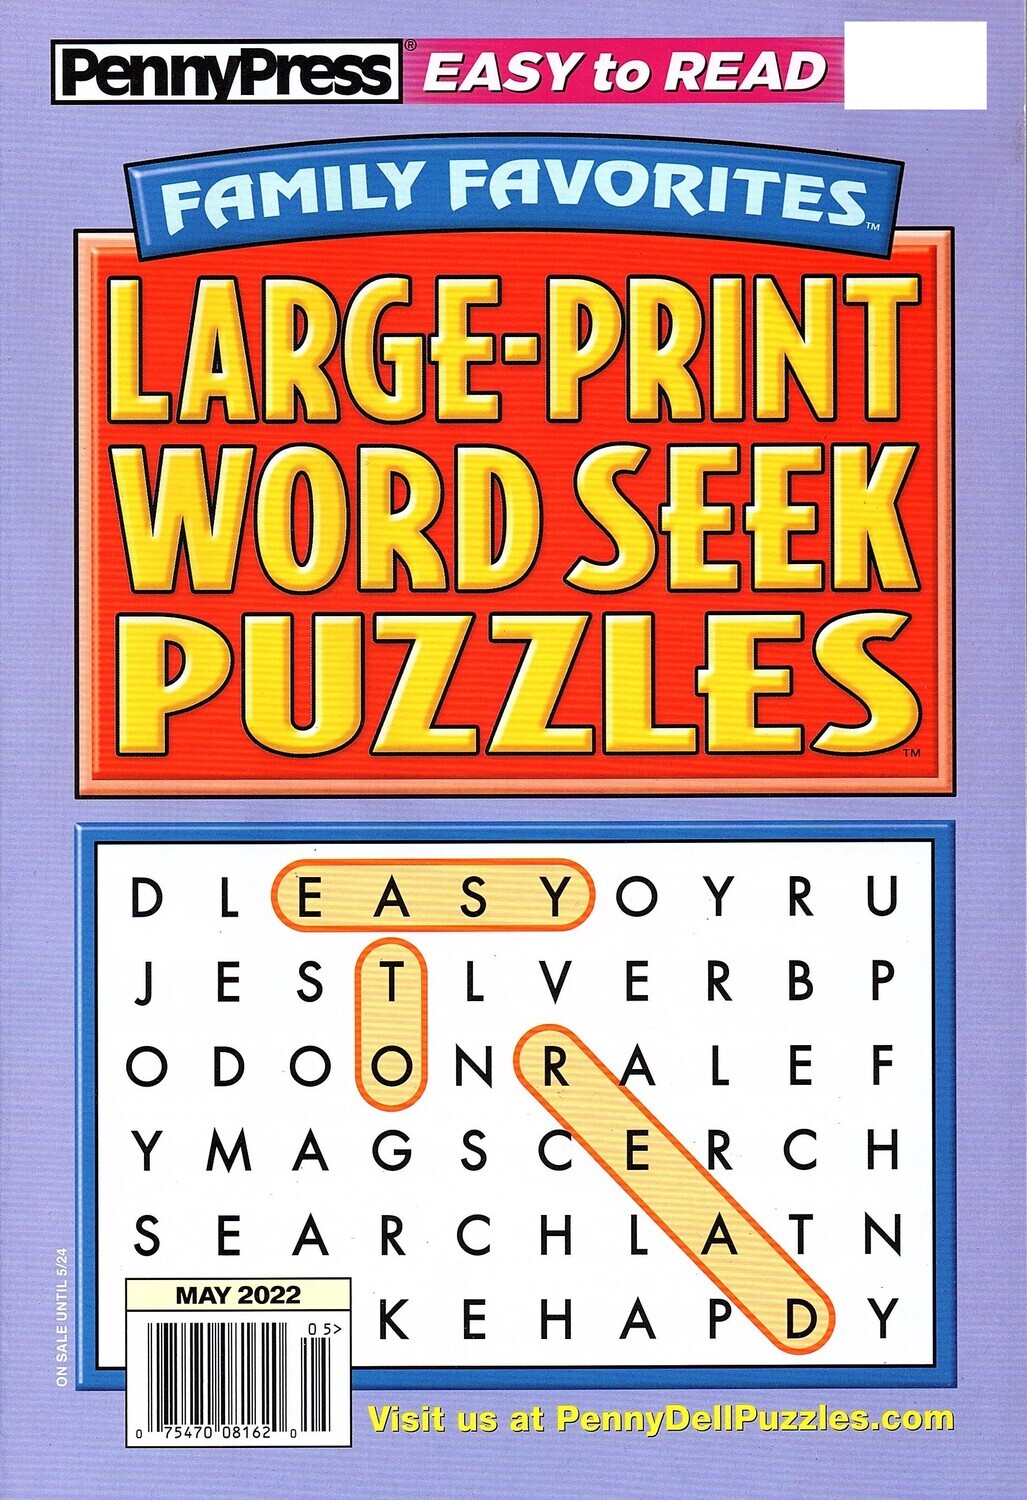 Family Favorites Word Seek Puzzles May 2022